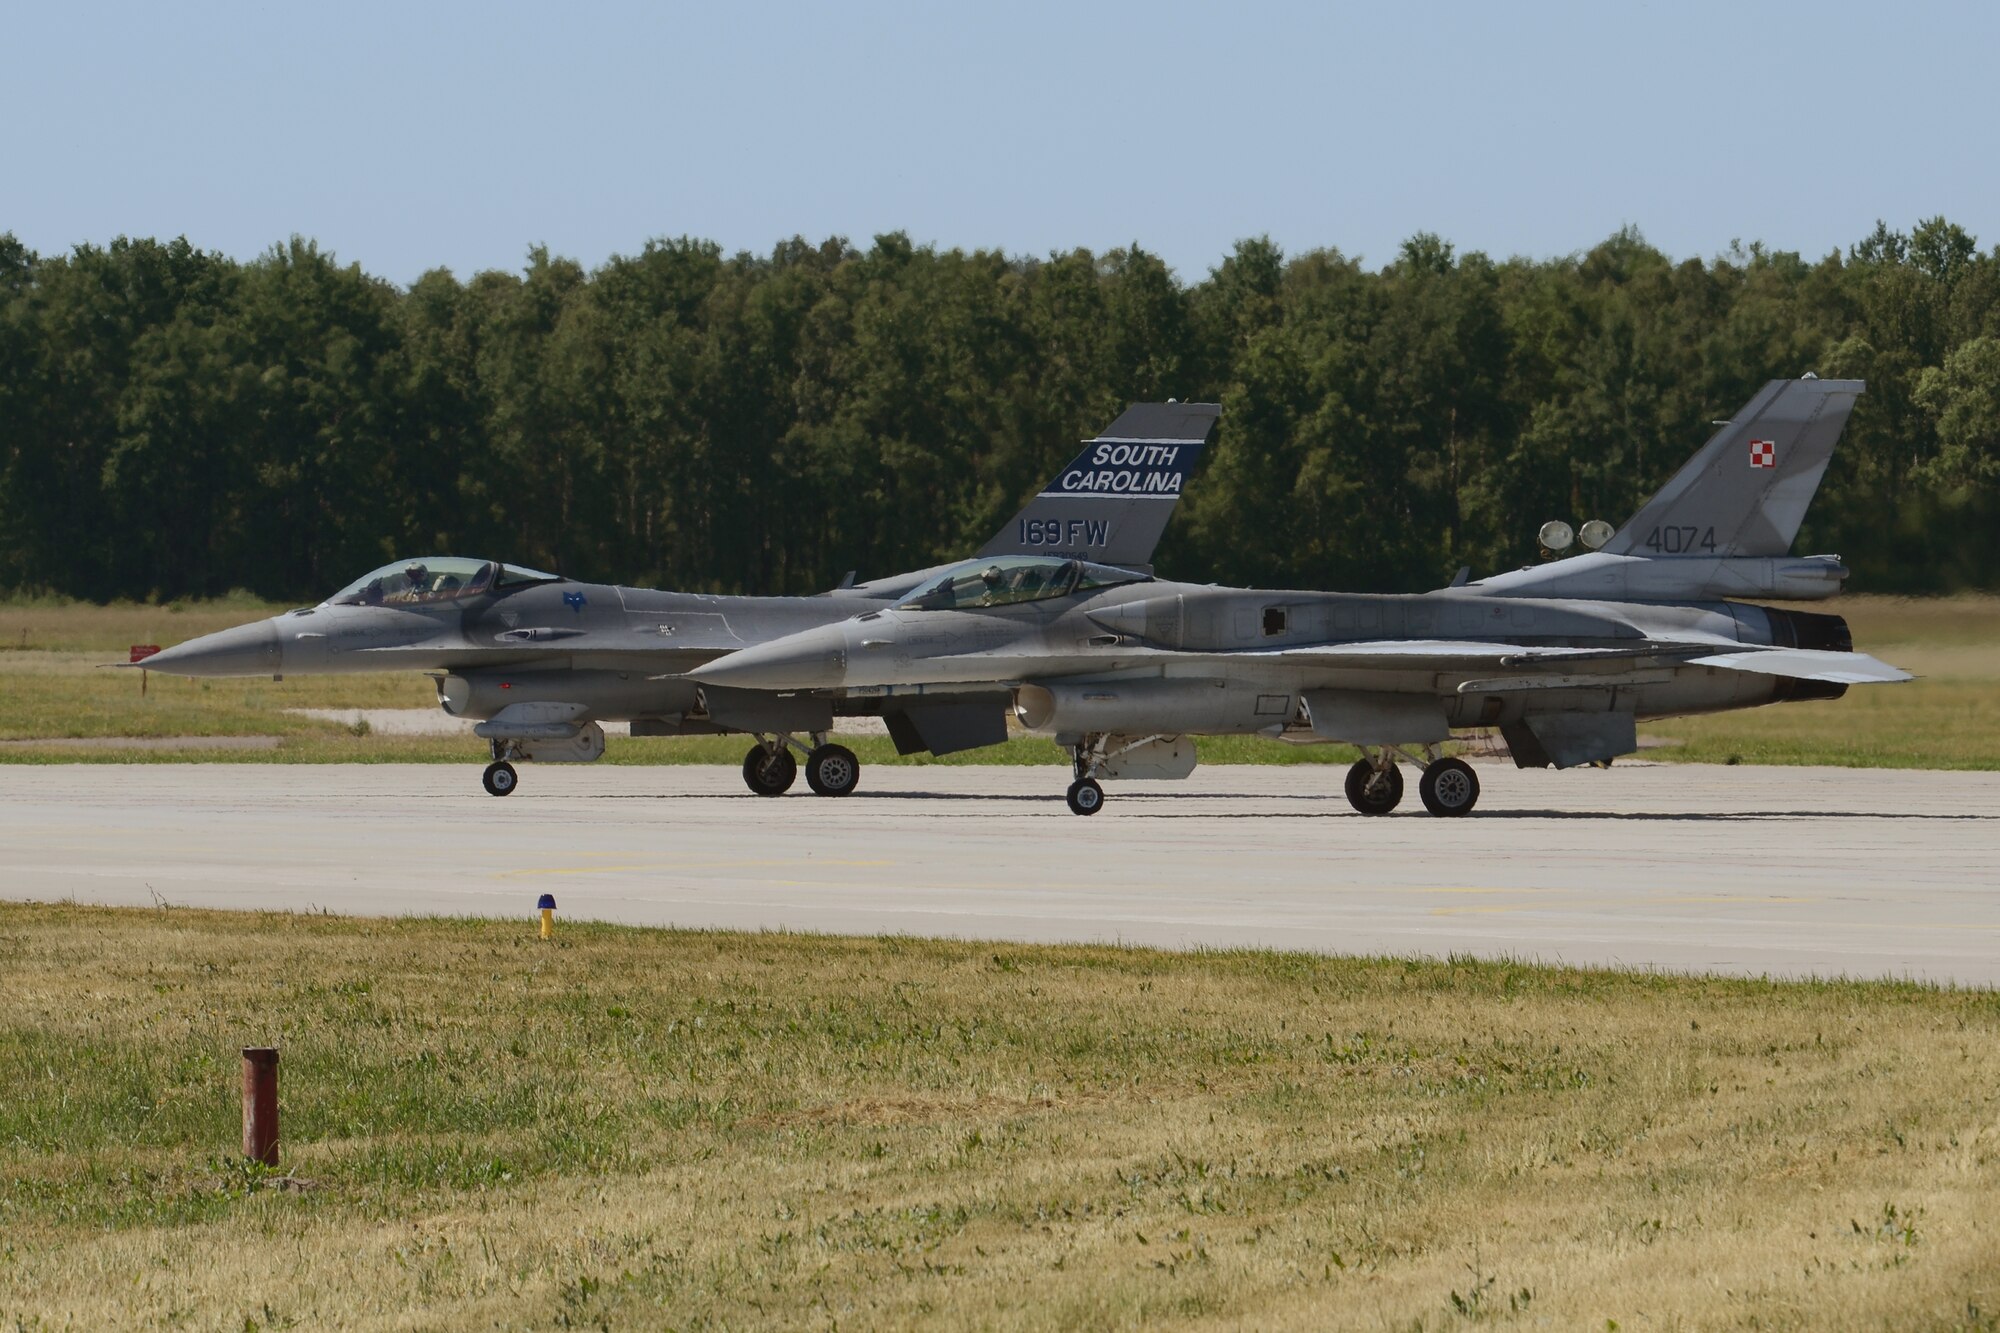 F-16 fighter jets from Poland's 32nd Tactical Air Base and the South Carolina Air National Guard prepare to taxi for takeoff at Łask Air Base, Poland in support of Operation Atlantic Resolve, June 5, 2015. U.S. Air Force Airmen from Spangdahlem Air Base, Germany, and the South Carolina Air National Guard’s 169th Fighter Wing from McEntire Joint National Guard Base, are deployed to Łask Air Base in support of Operation Atlantic Resolve, during the month of June. These training missions, called aviation detachment rotations, pair U.S. fighter pilots and maintenance crews with their Polish air force counterparts at Łask Air Base, during Operation Atlantic Resolve. This rotation, AvDet 15-3, is the first to combine guard/reserve and active-duty units in Poland to offer more diverse opportunities to share best practices and build professional relationships with the Polish air force. This bilateral training, hosted by permanently assigned USAF service members assigned to Poland, has taken place since 2012. Through strengthened relationships and engagements with our allies, the U.S. and NATO demonstrate their shared commitment to a peaceful, stable and secure Europe. (South Carolina Air National Guard photo by Senior Master Sgt. Edward Snyder / RELEASED)